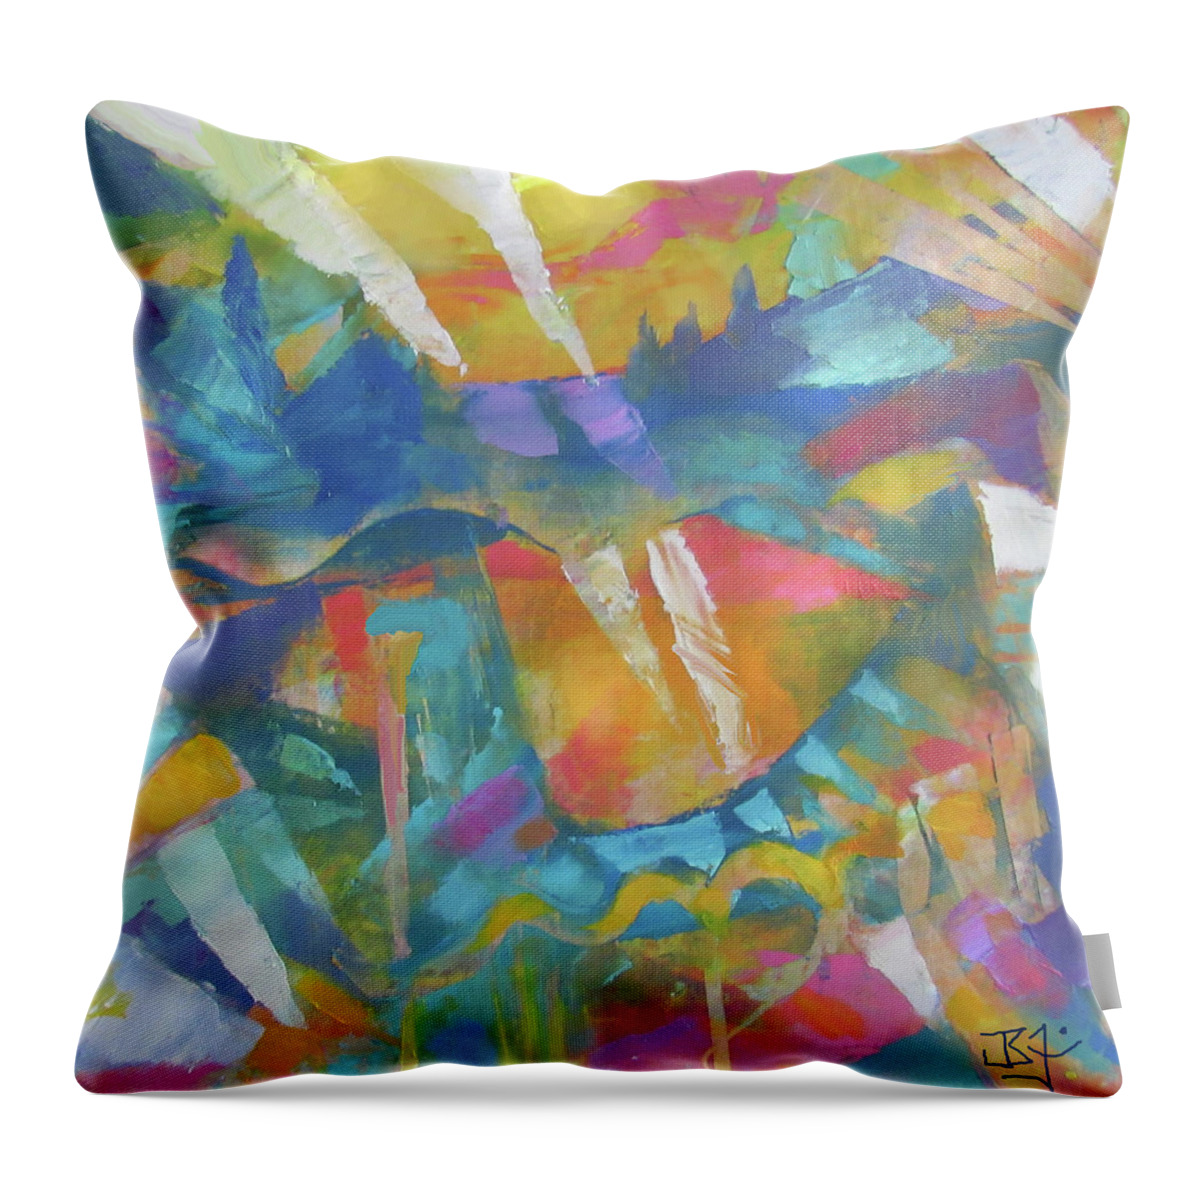 Colorful Abstract Throw Pillow featuring the painting Southwest by Jean Batzell Fitzgerald